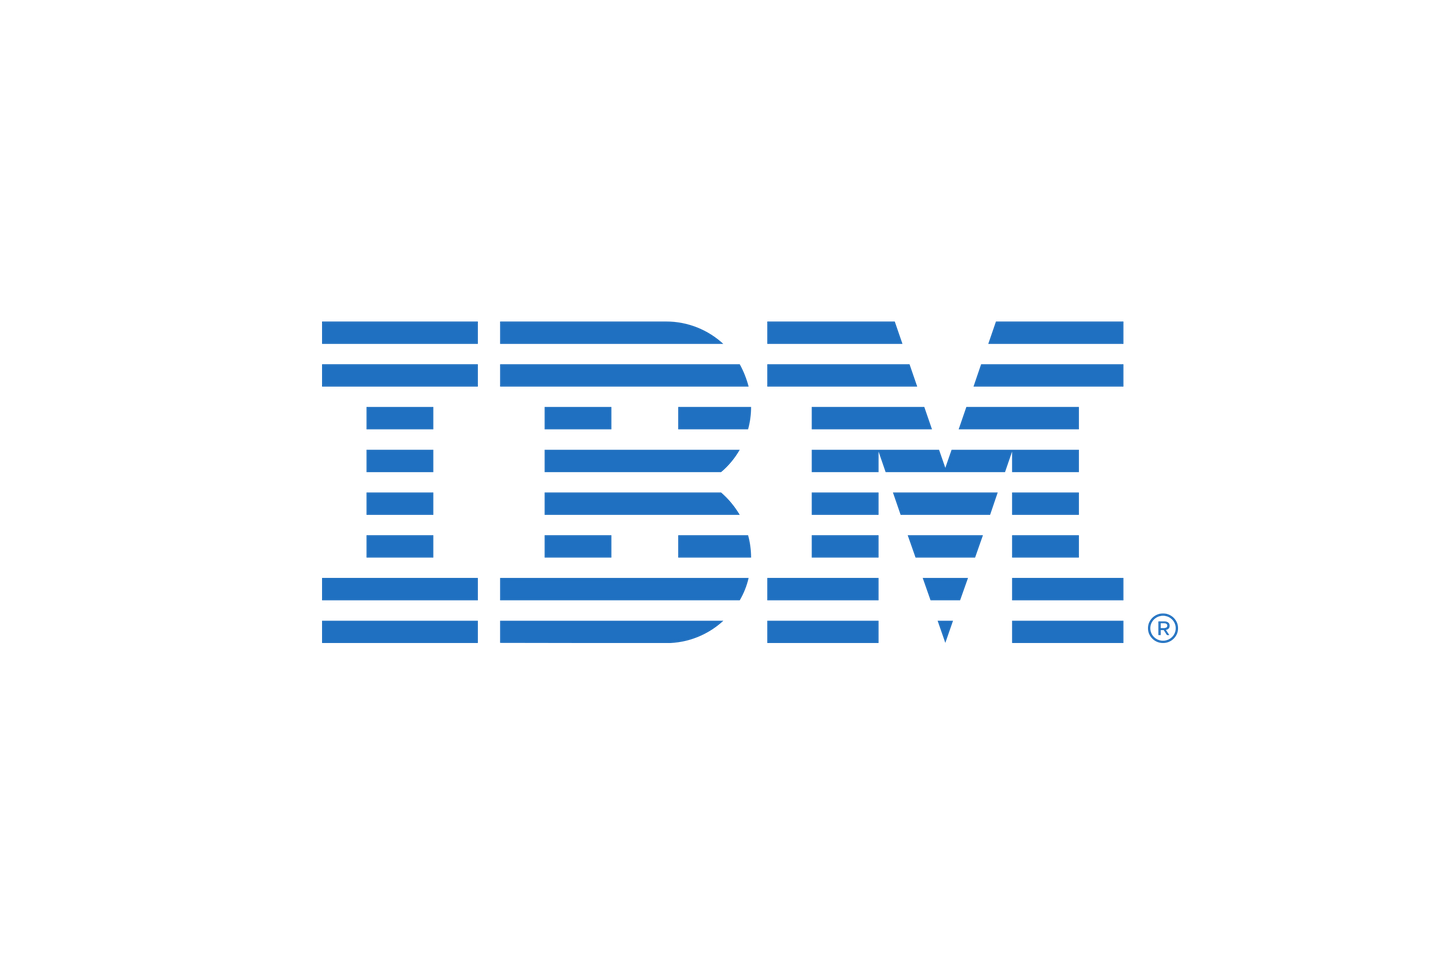 IBM Learning for SAP Solutions - BPC 11 Standard Bootcamp Authorized User per Annum